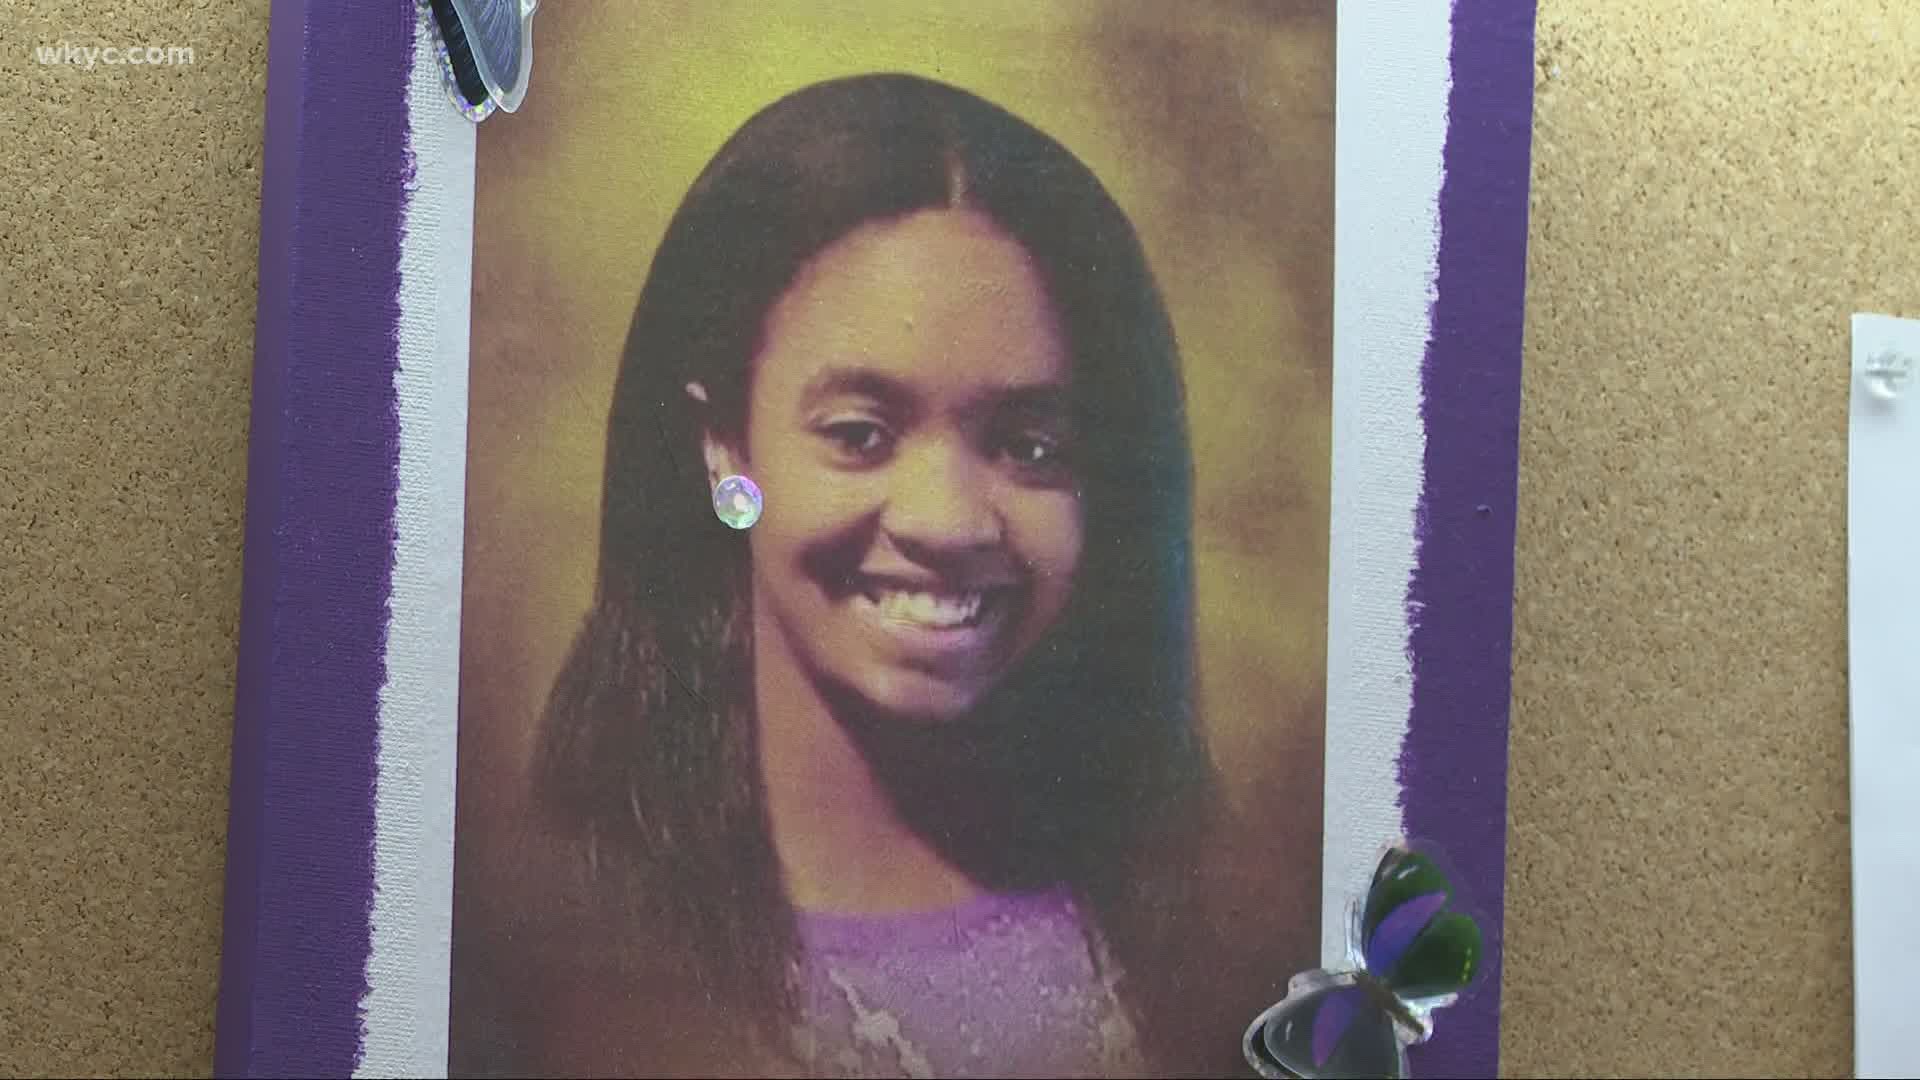 Aug. 7, 2020: The 500th 'Walls of Love' will be installed in Cleveland today to honor Alianna DeFreeze. 3News' Lindsay Buckingham has the details.